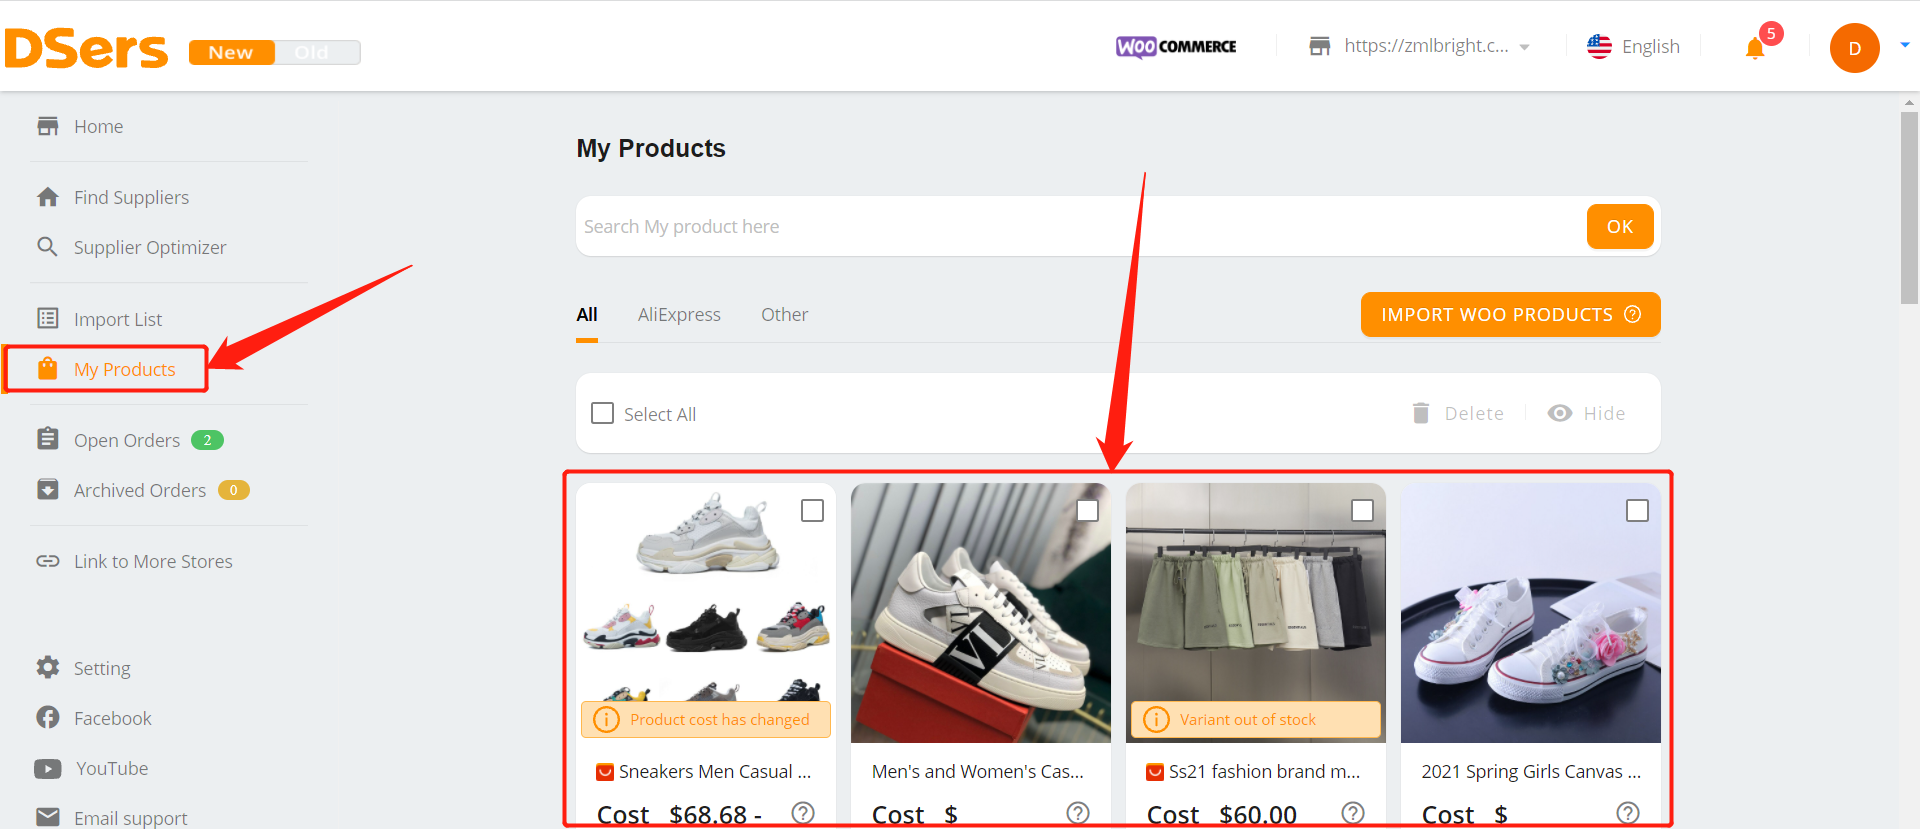 Connect AliExpress suppliers to your products with Woo DSers - Access My Products - Woo DSers